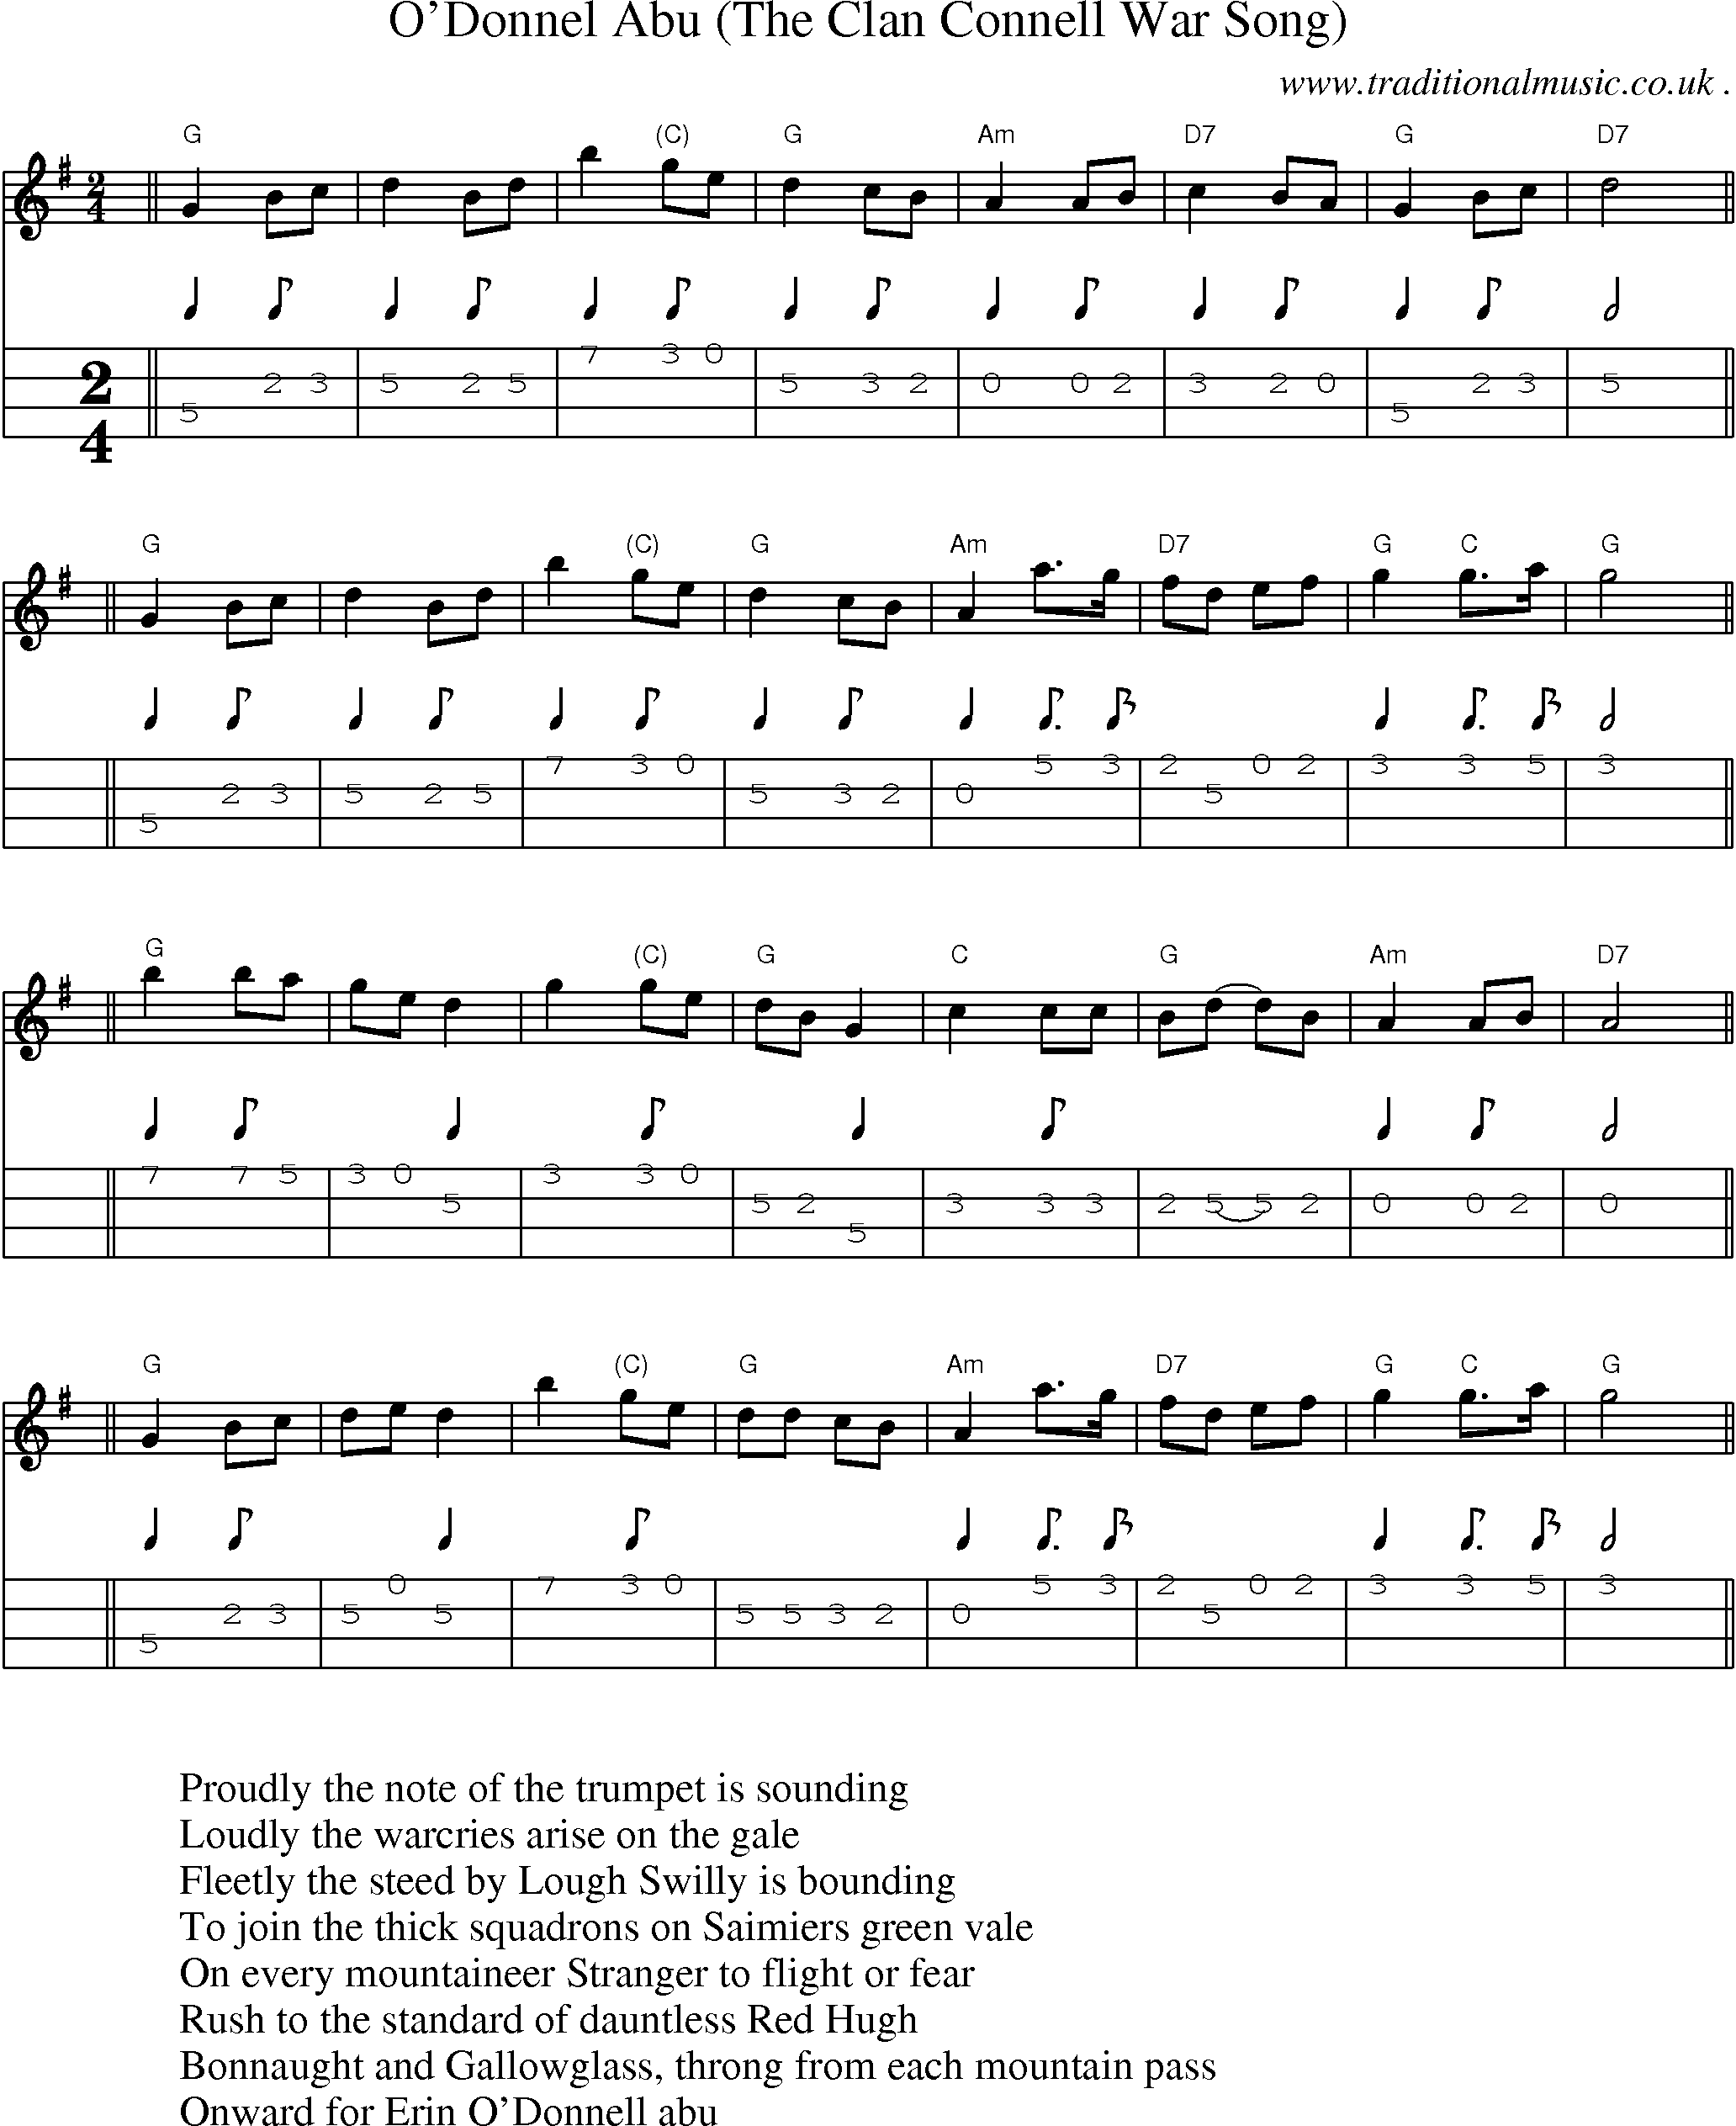 Sheet-Music and Mandolin Tabs for Odonnel Abu (the Clan Connell War Song)